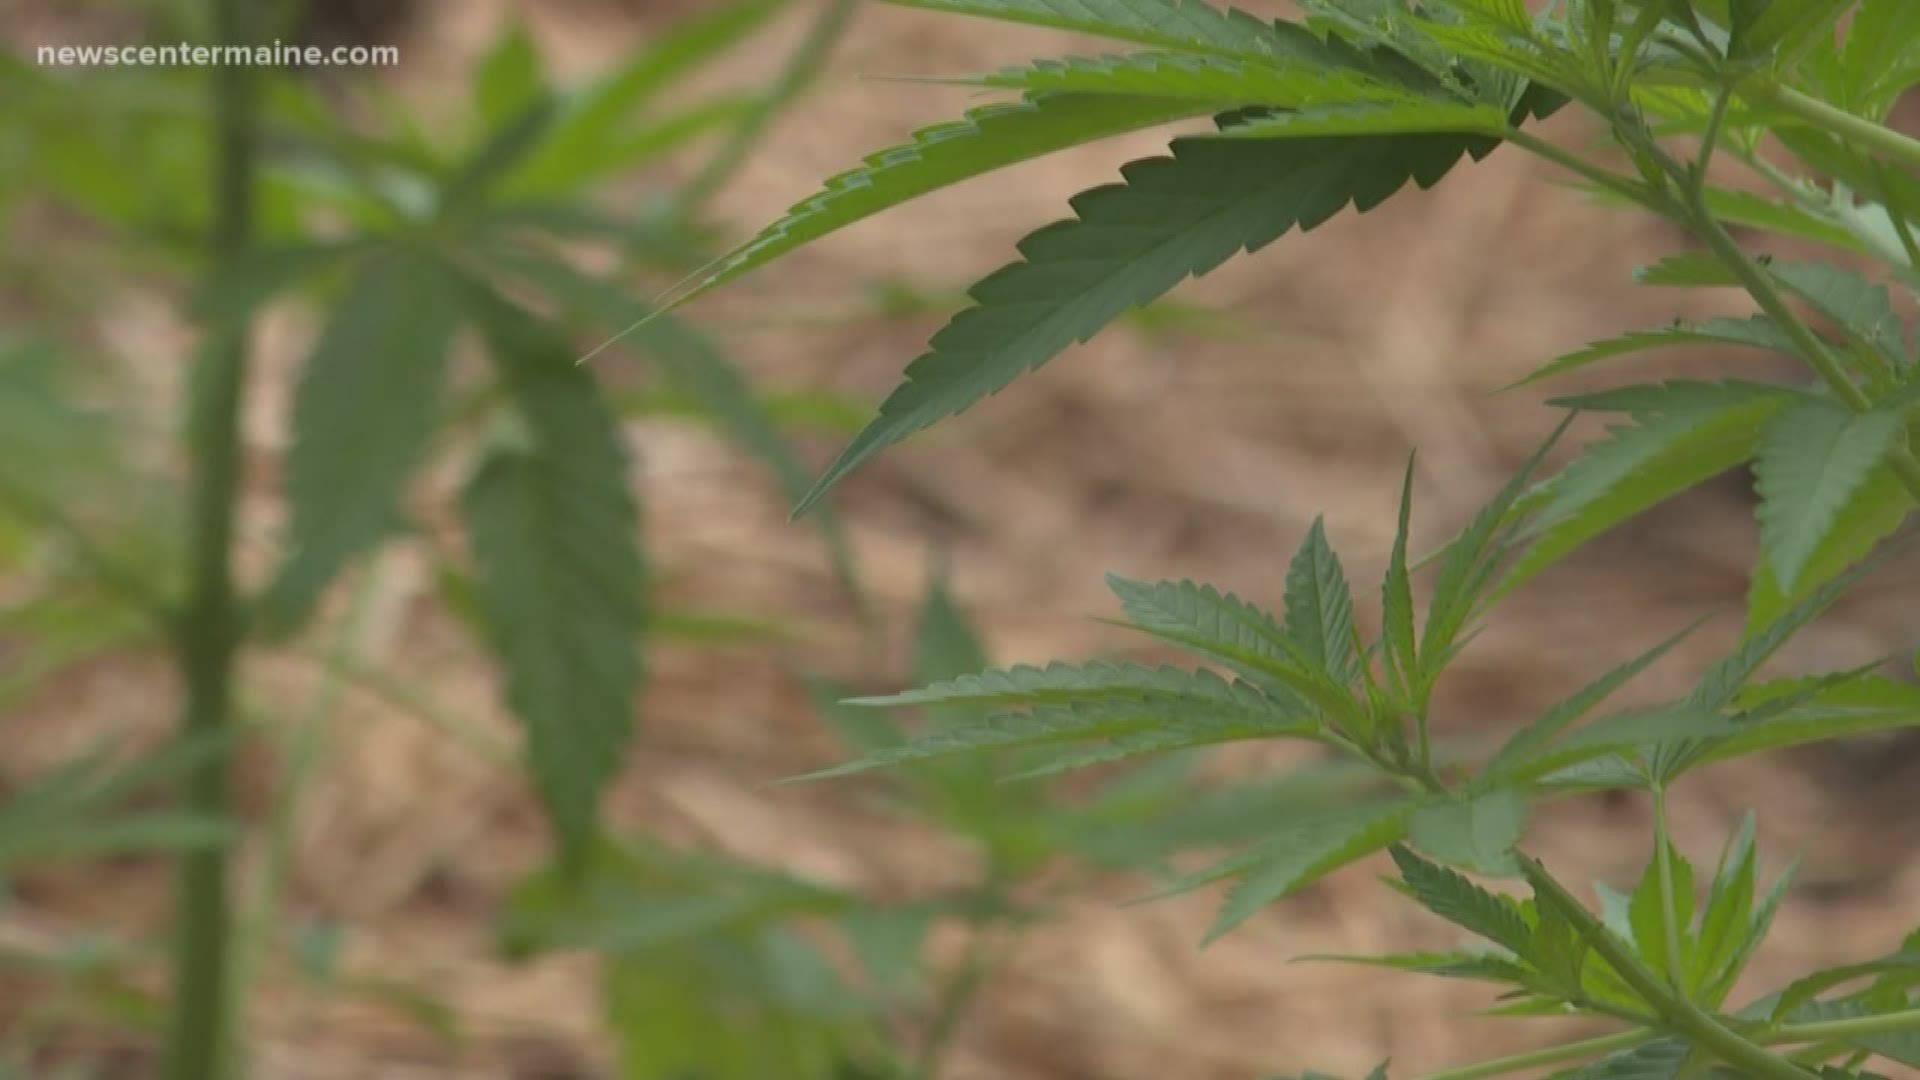 Hemp is drawing farmers and entrepreneurs to the state of Maine after a bill was signed in 2018 to allow it to be grown legally.